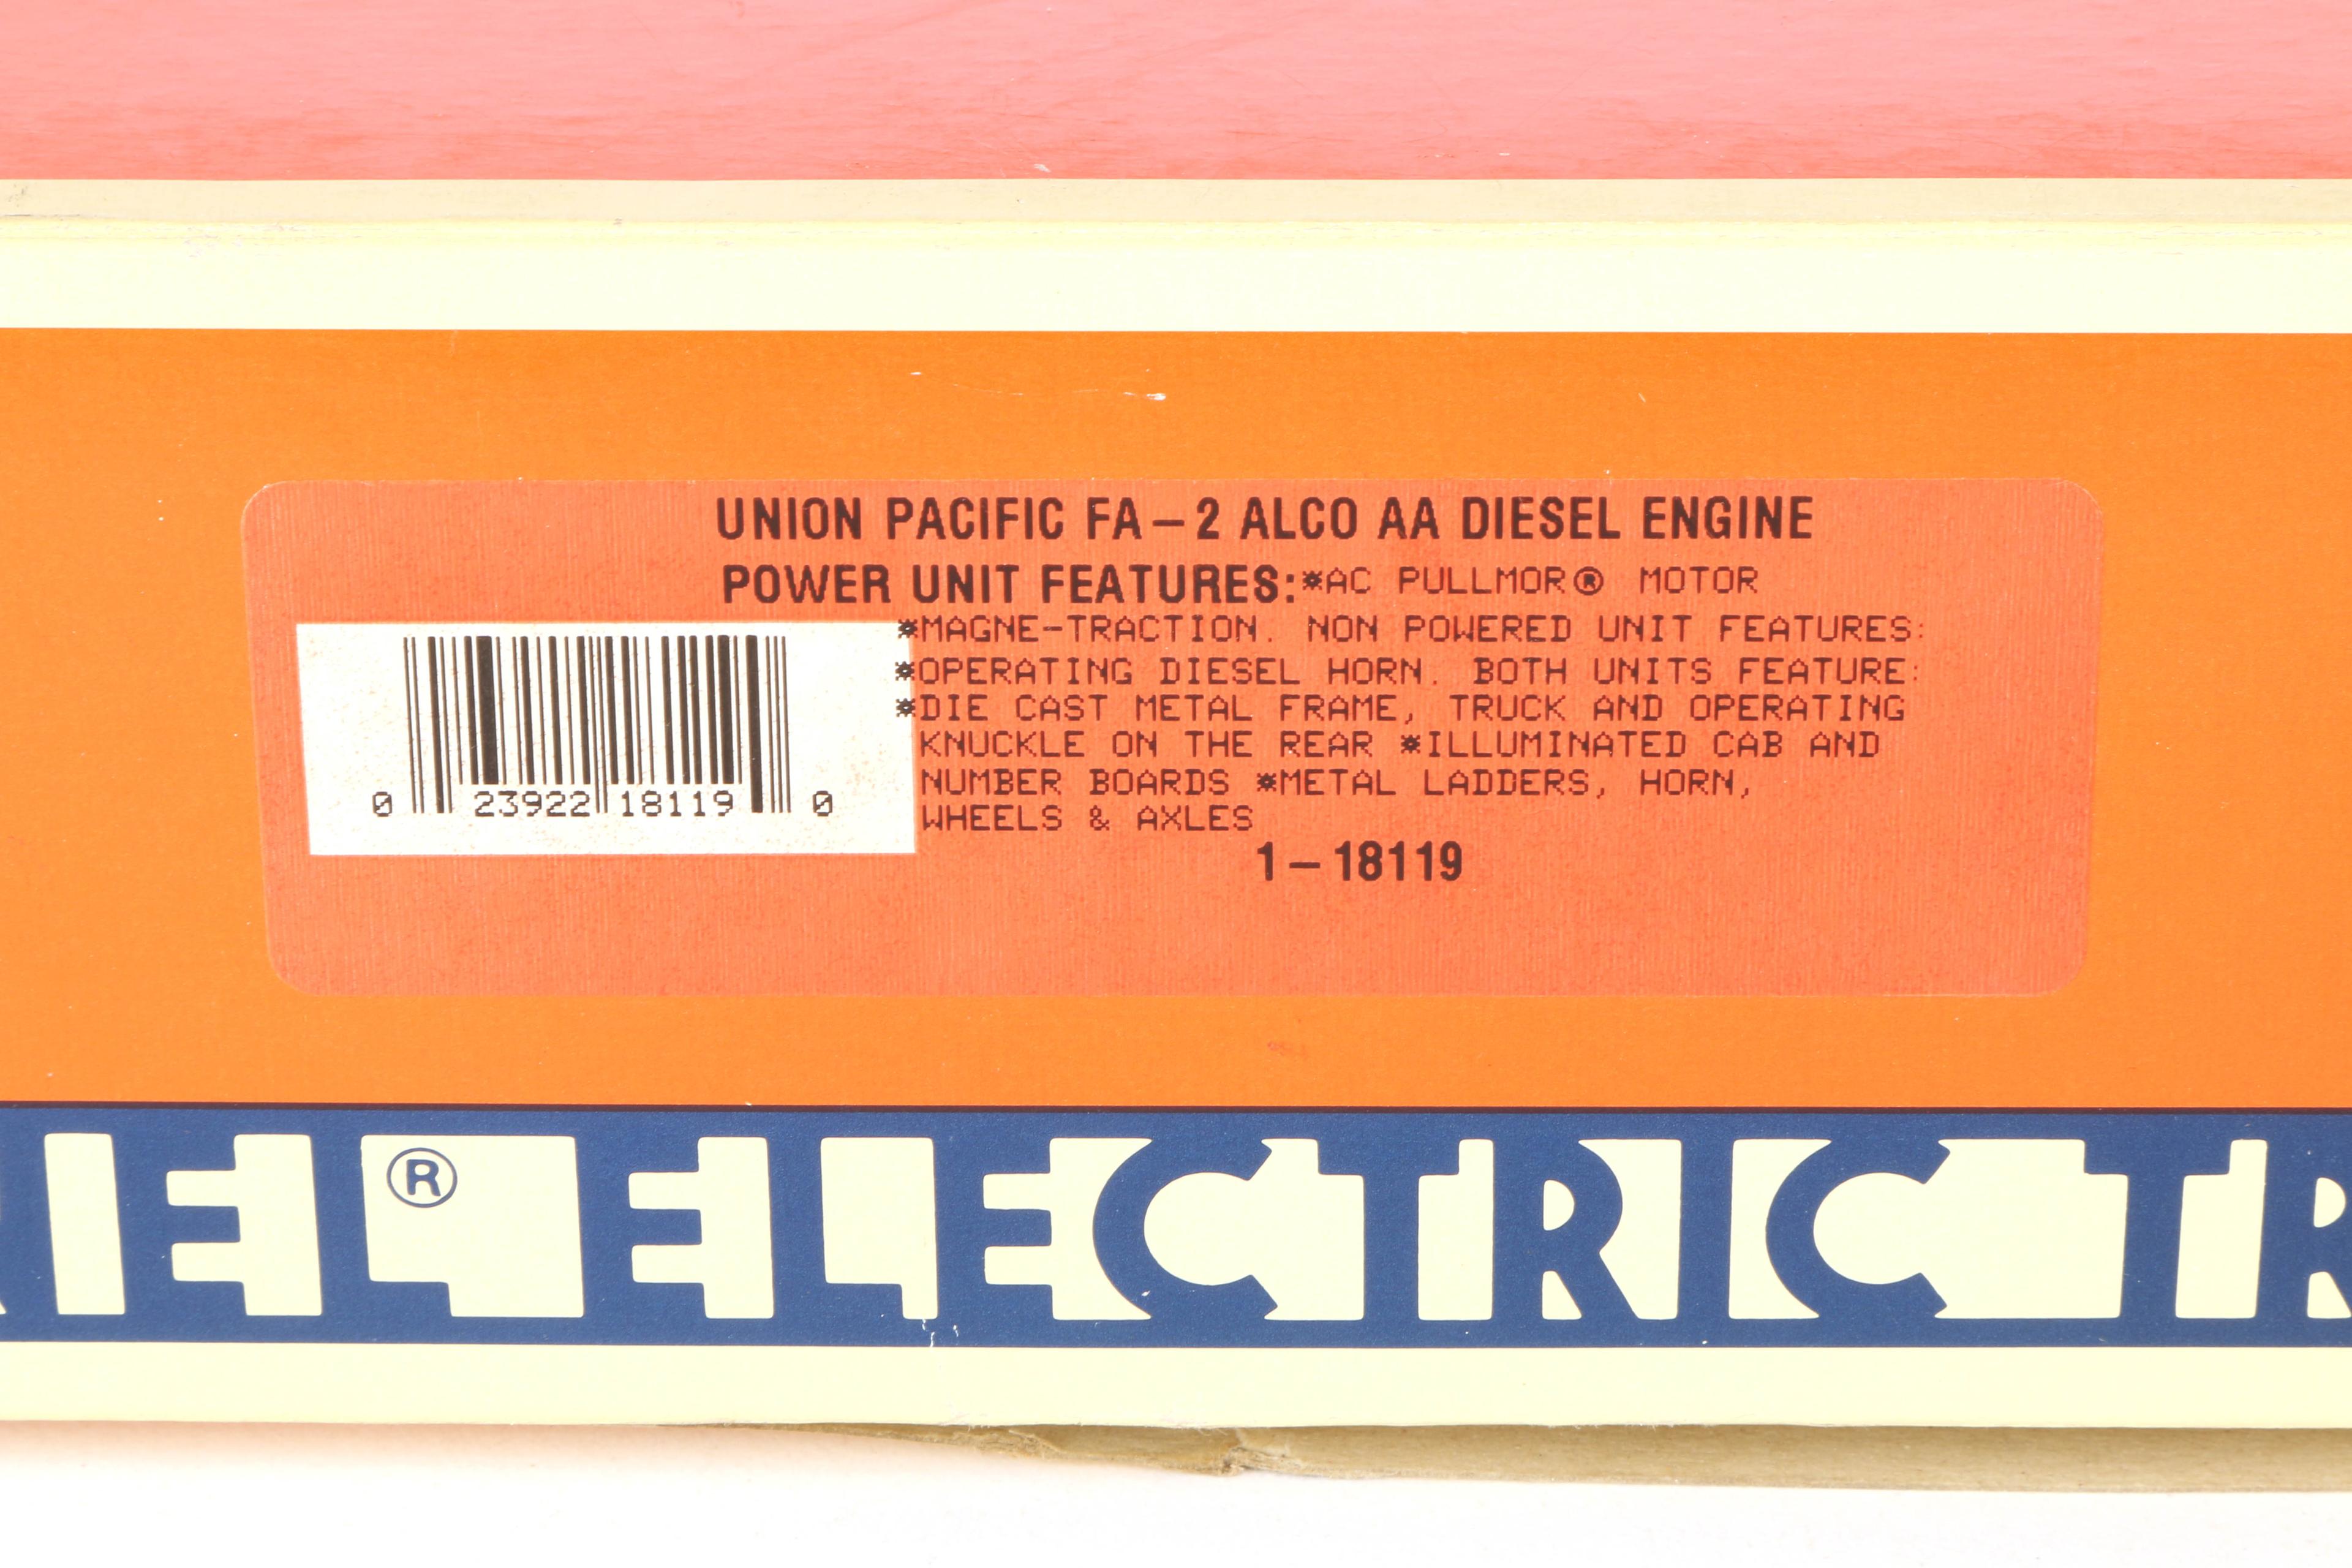 Lionel Union Pacific FA-2 Alco AA Diesel Engine Power Unit Features